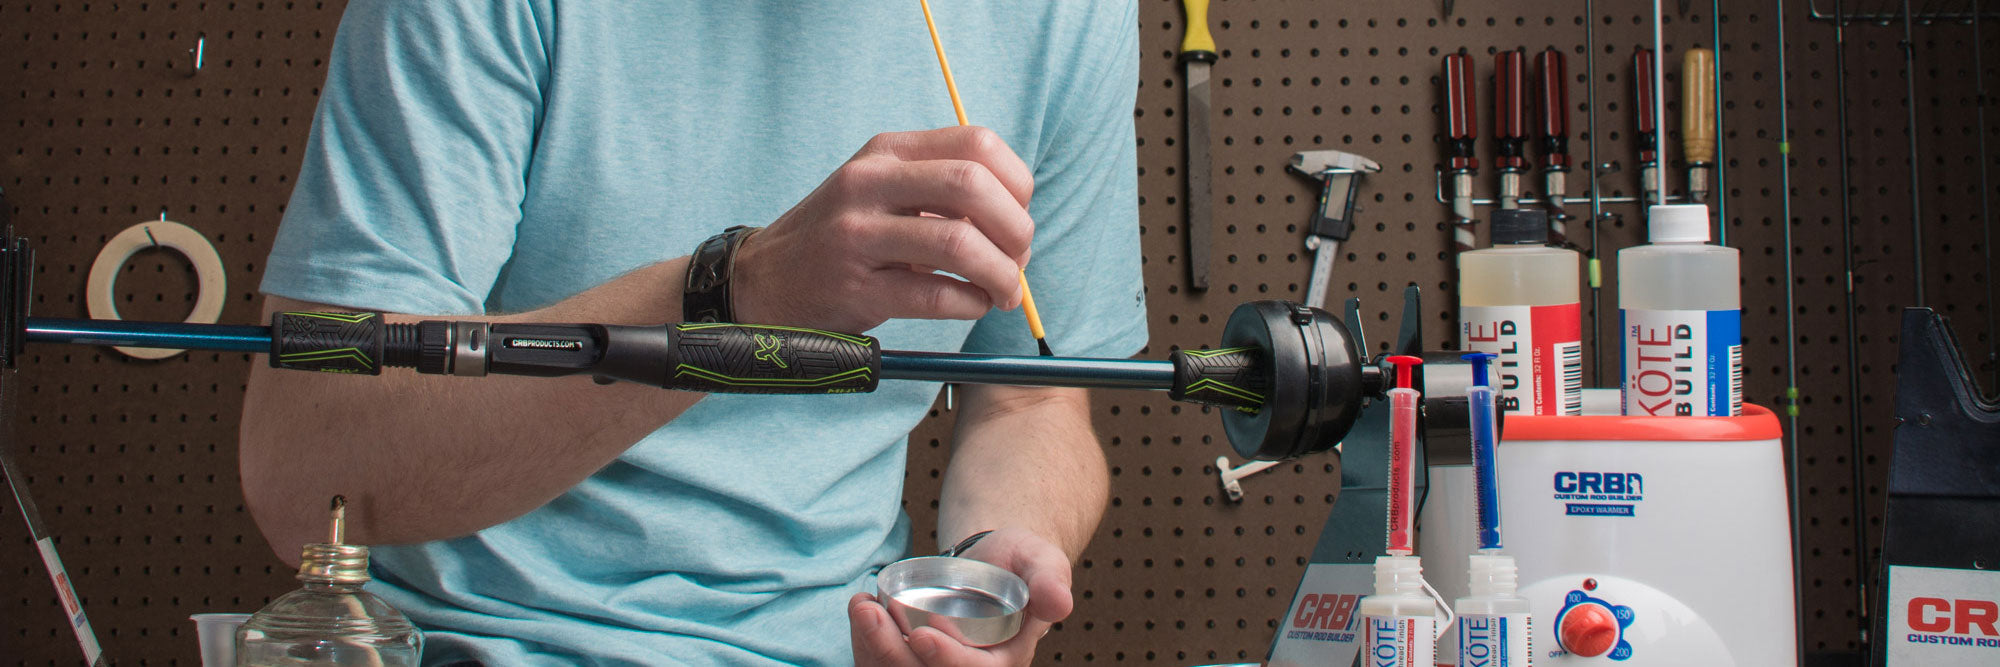 Build Your Own Fly Rod: DIY Video Series - Fly Fishing